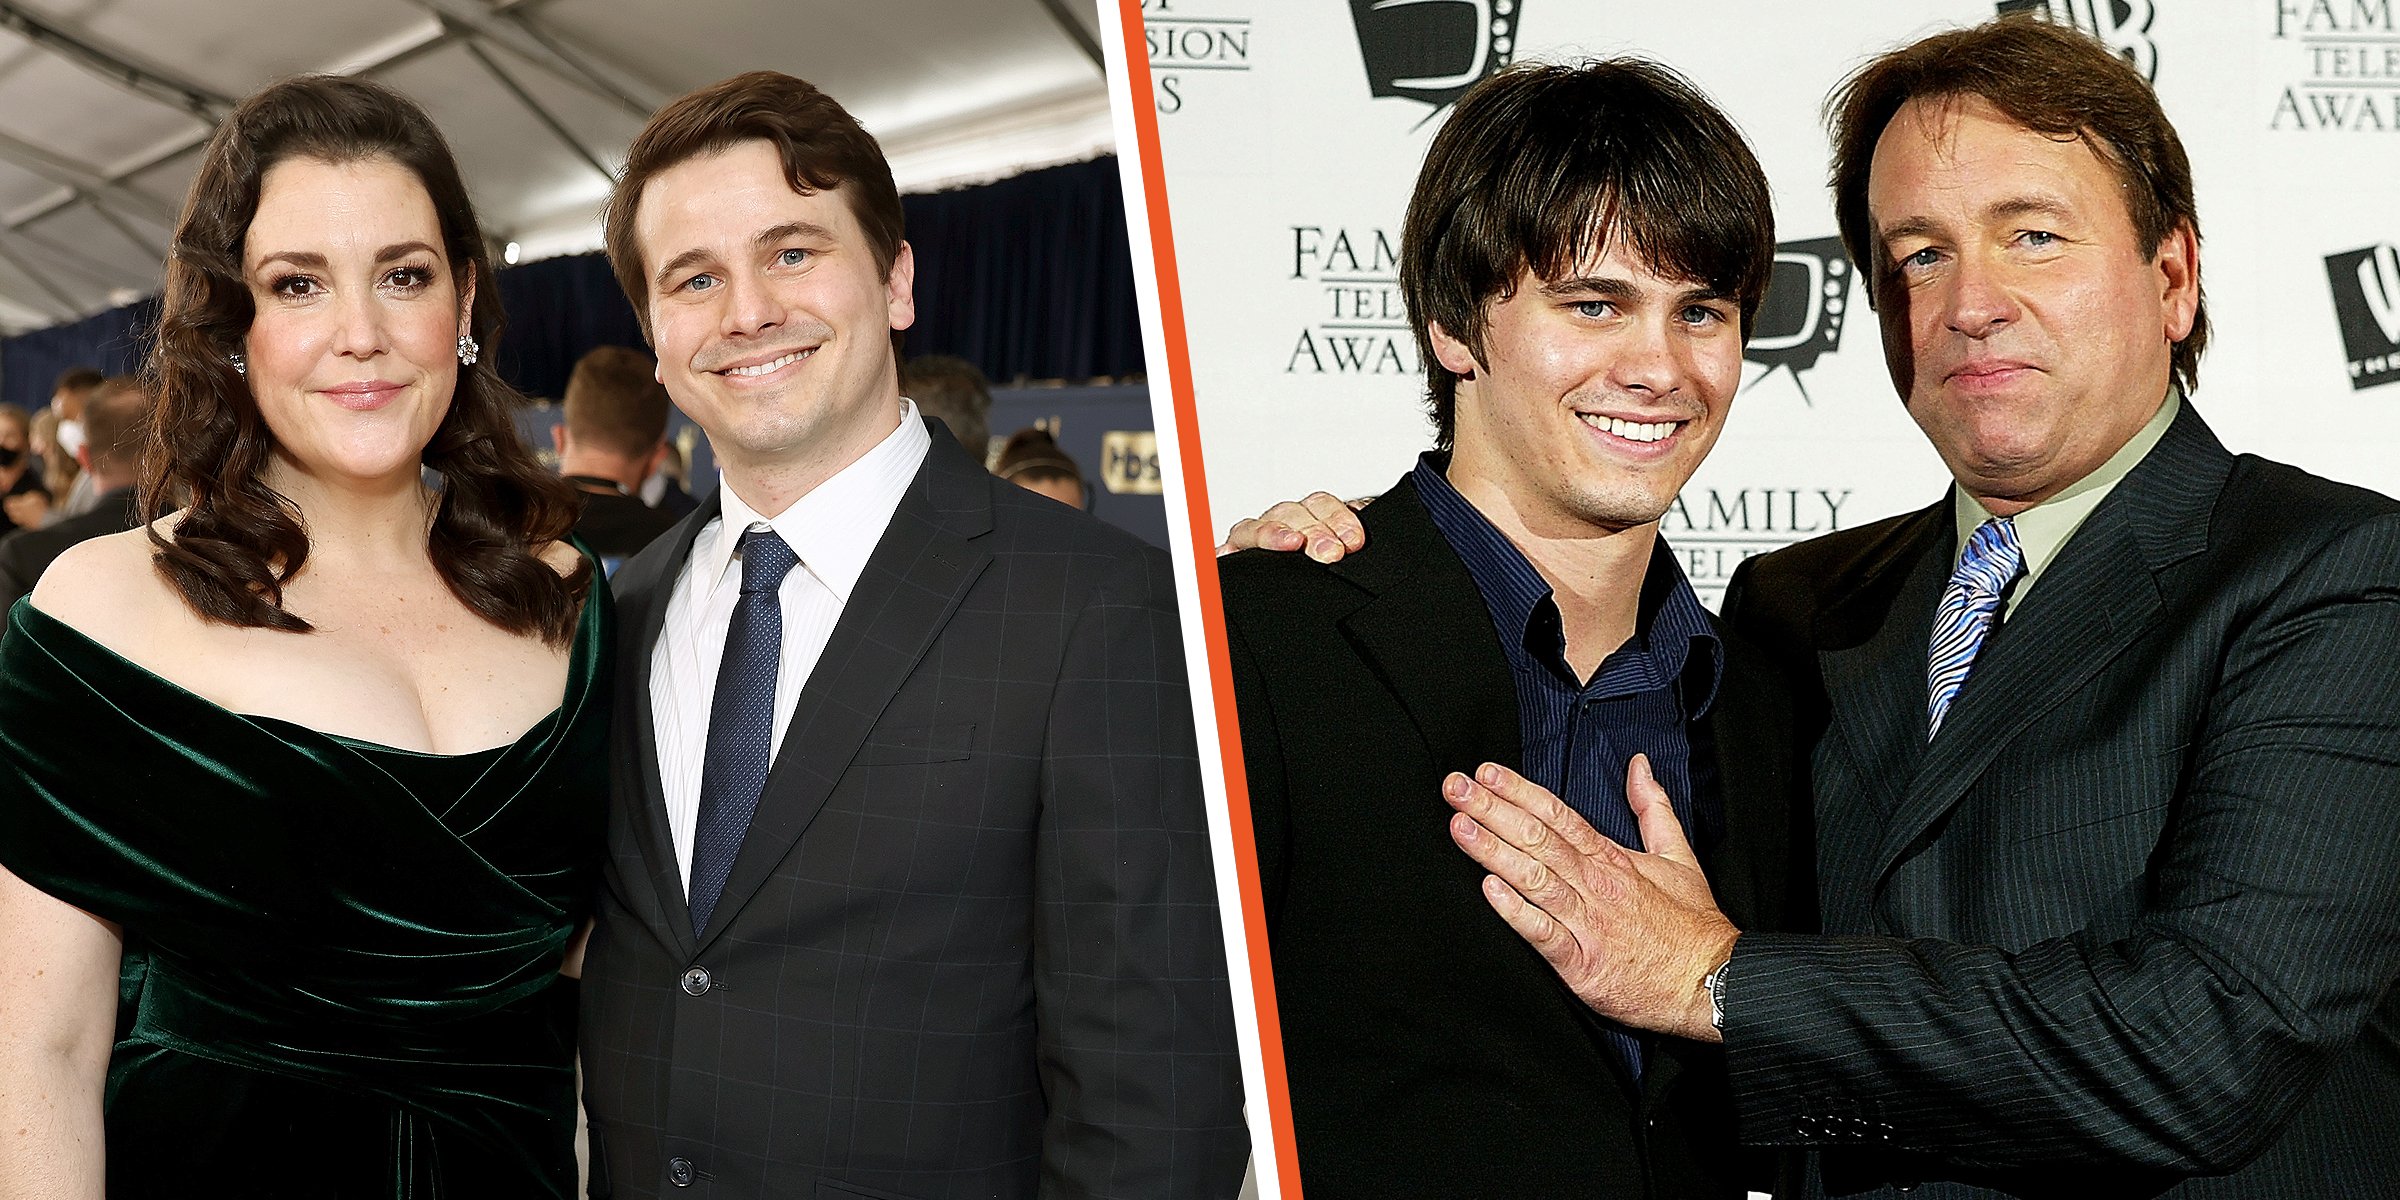 Melanie Lynskey and Jason Ritter | John Ritter and his son, Jason Ritter | Source: Getty Images